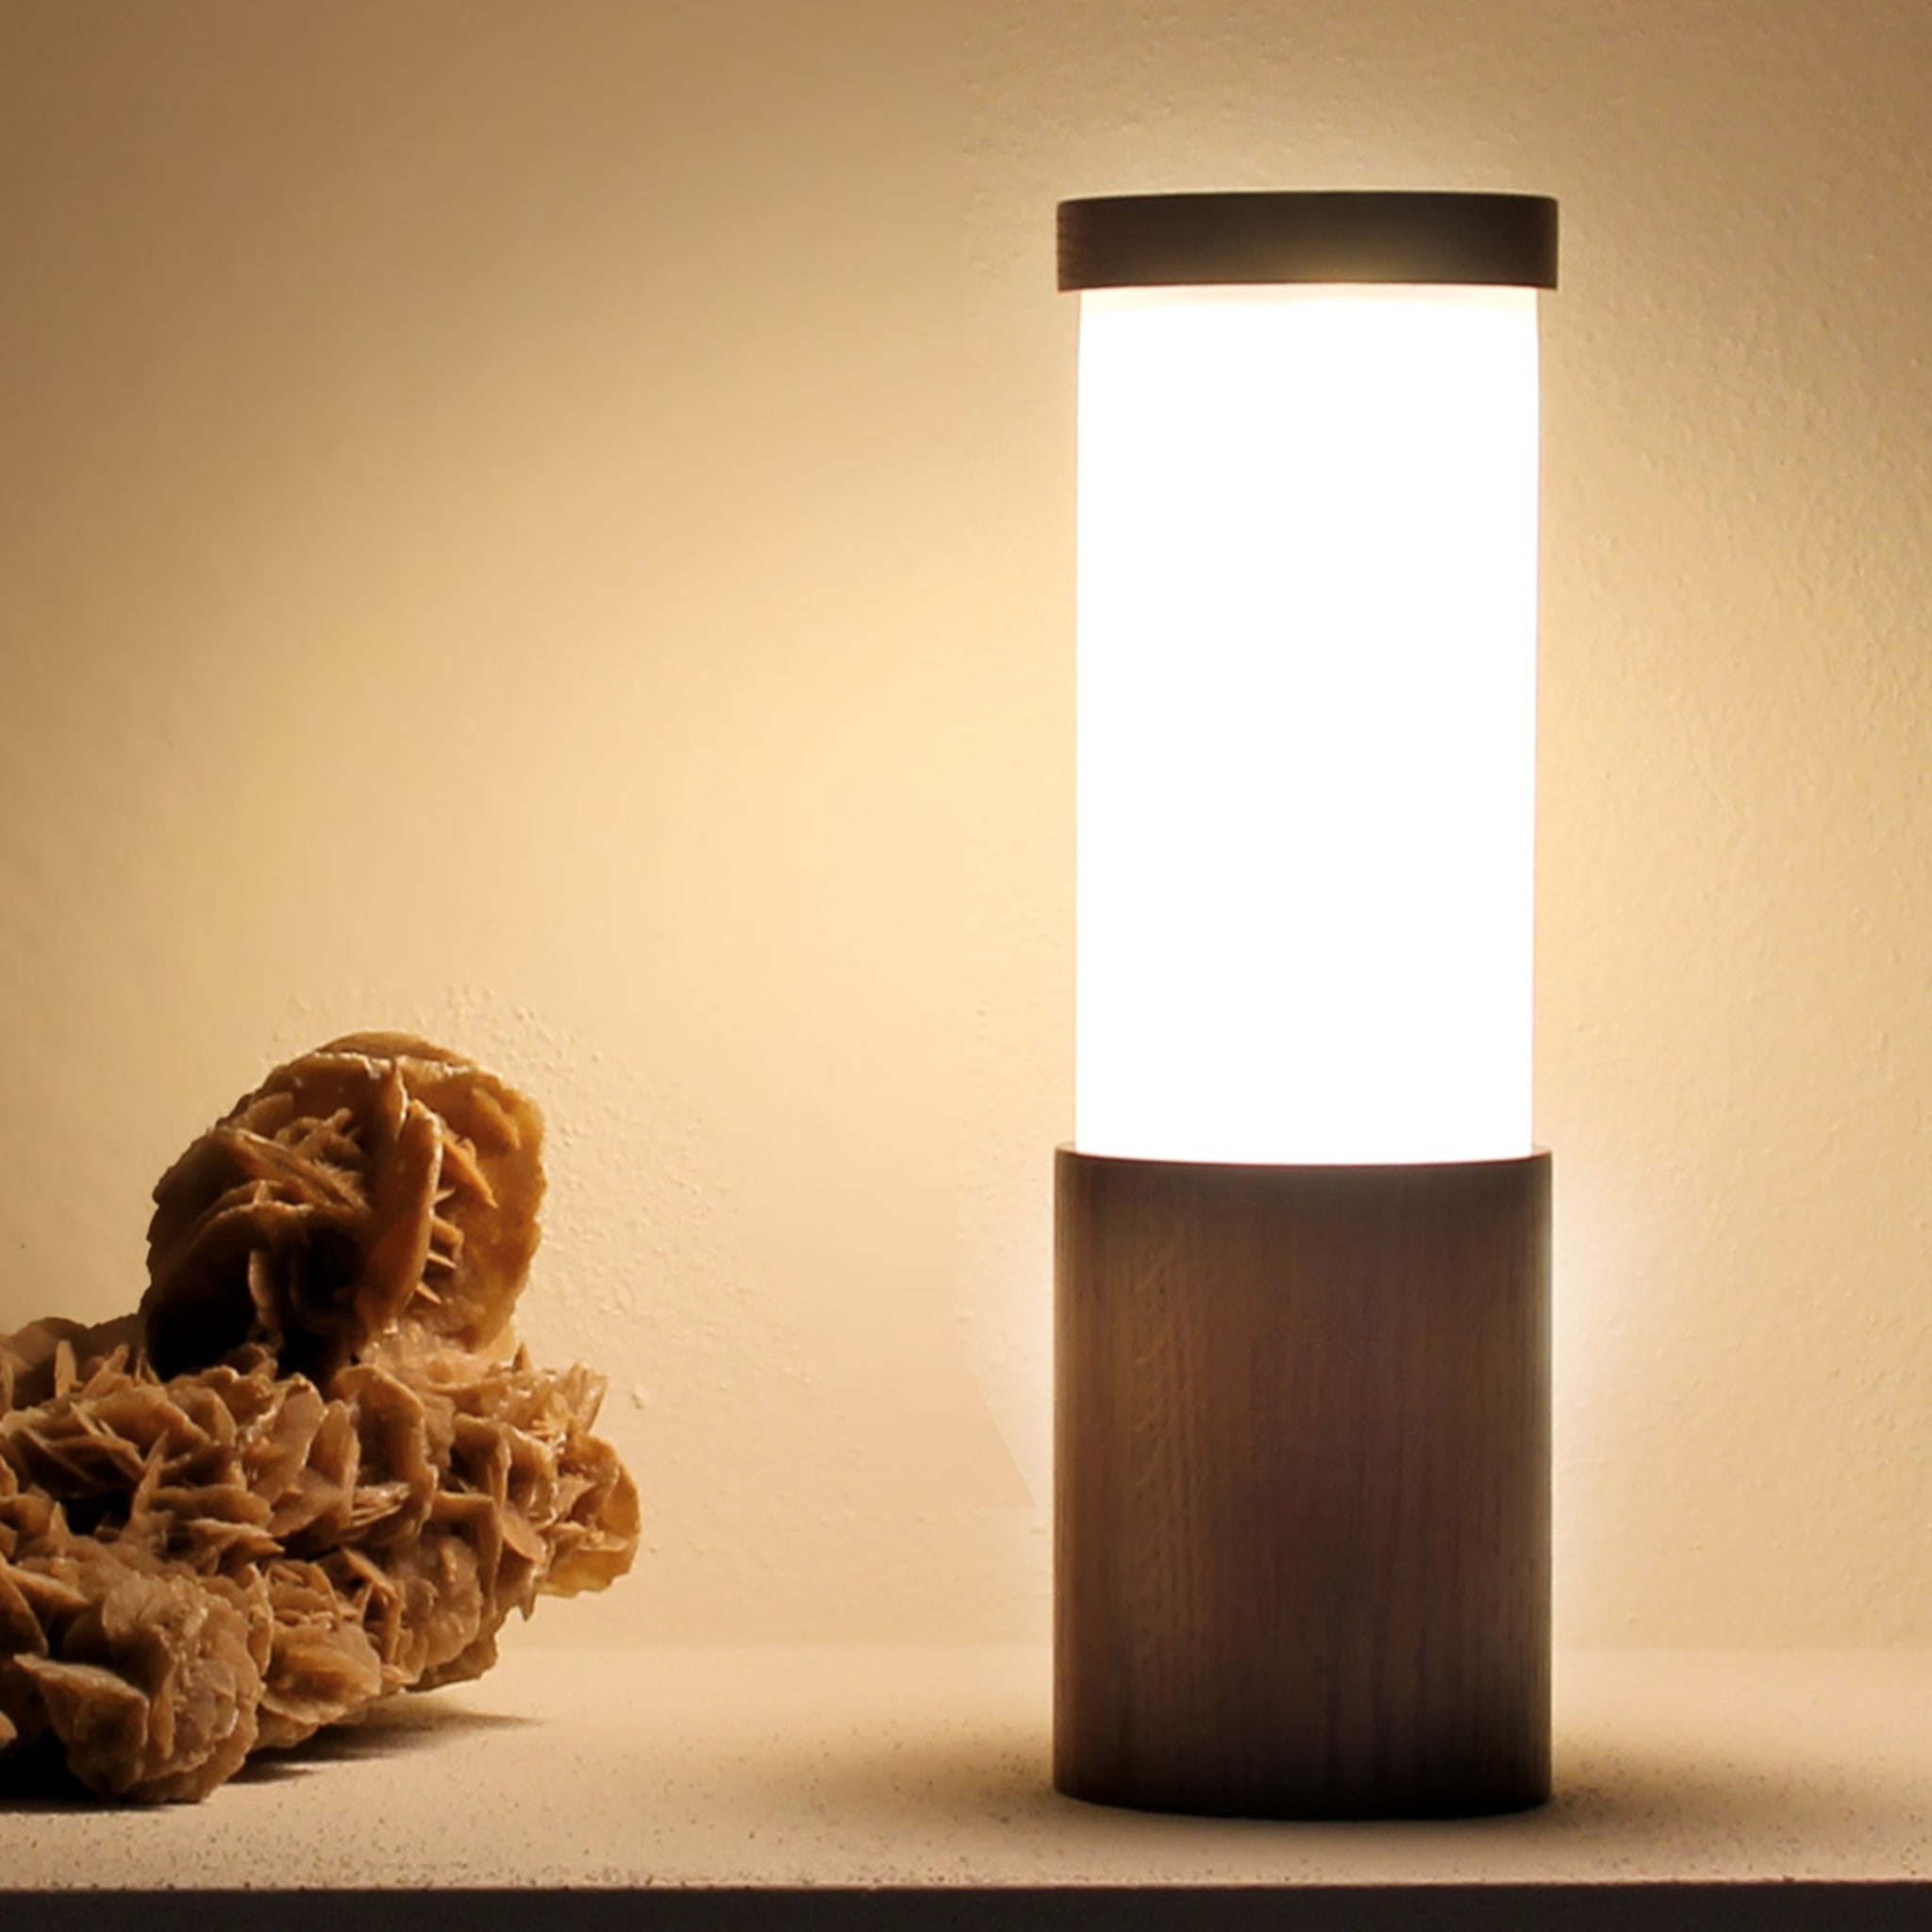 Tubino Noce Table Lamp by Stefano Tabarin - Alternative view 1